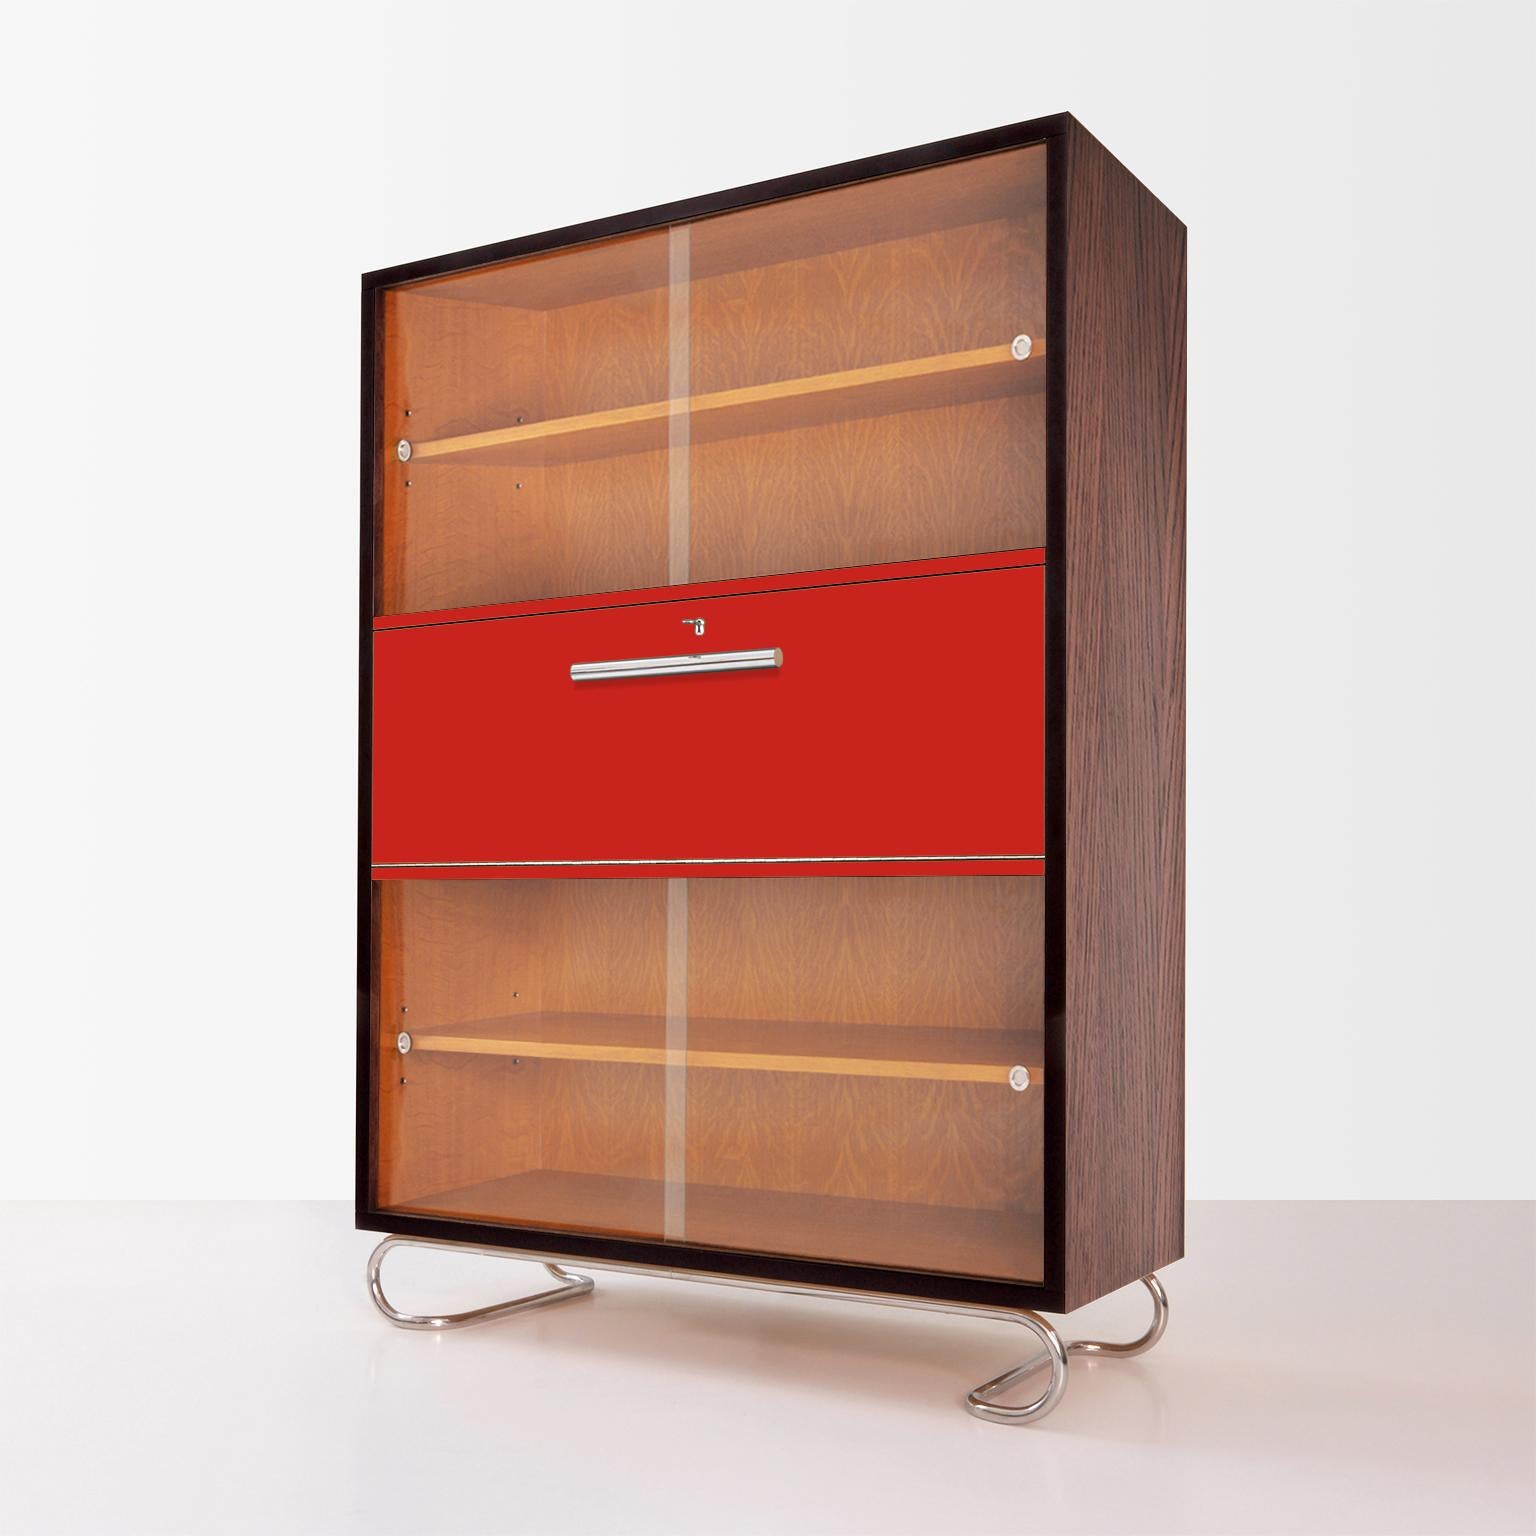 German Modernist Secretary Showcase, Lacquered Wood, Chrome-Plated Metal, Customizable For Sale